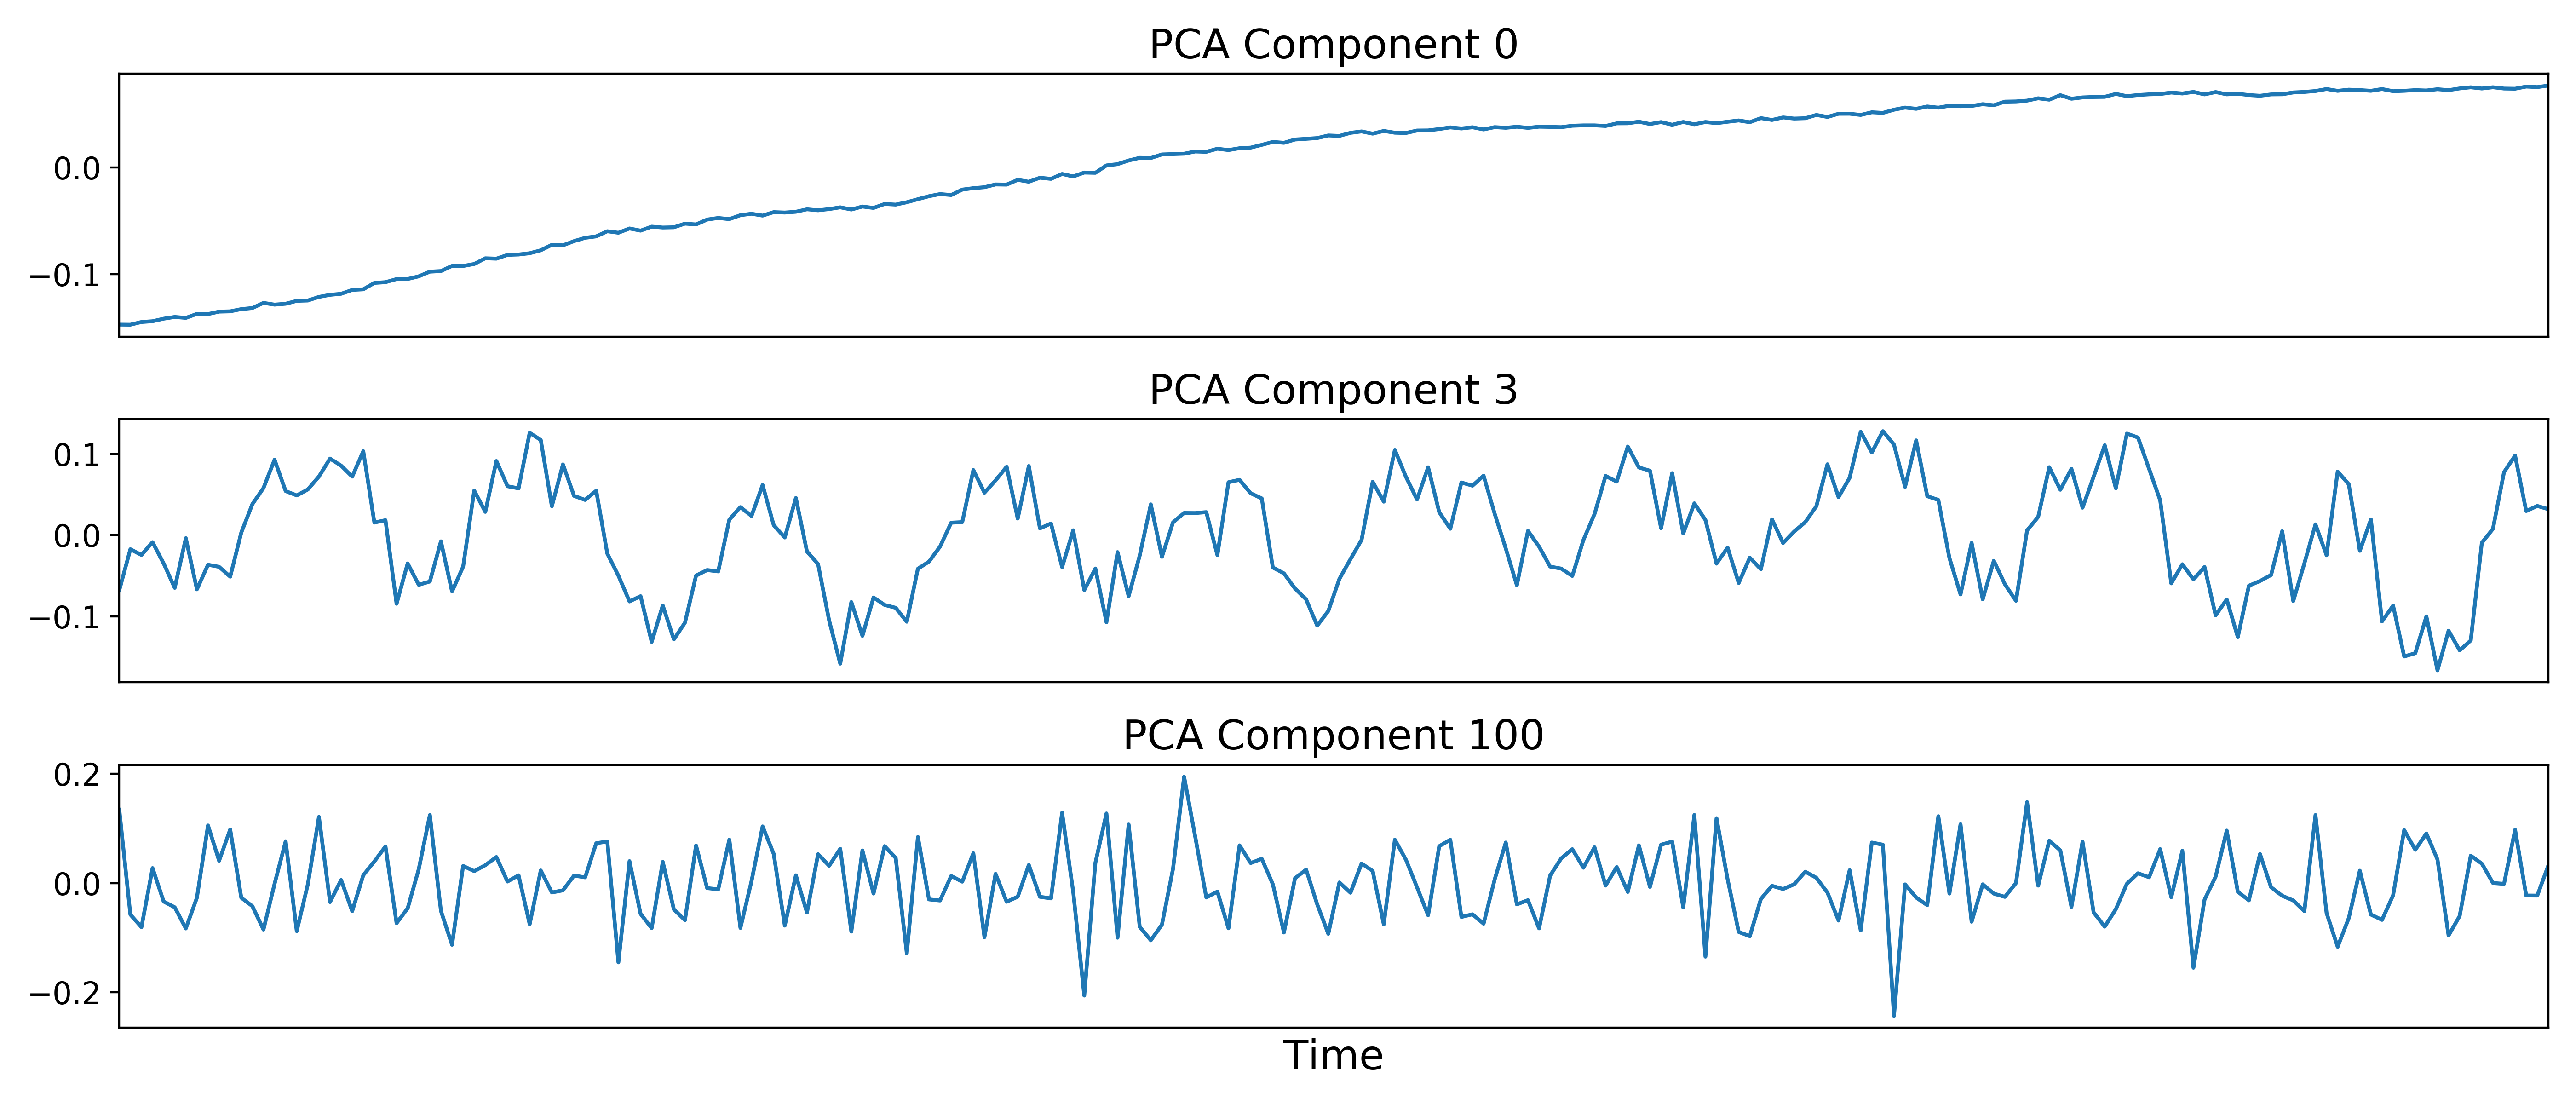 _images/a11_pca_component_timeseries.png